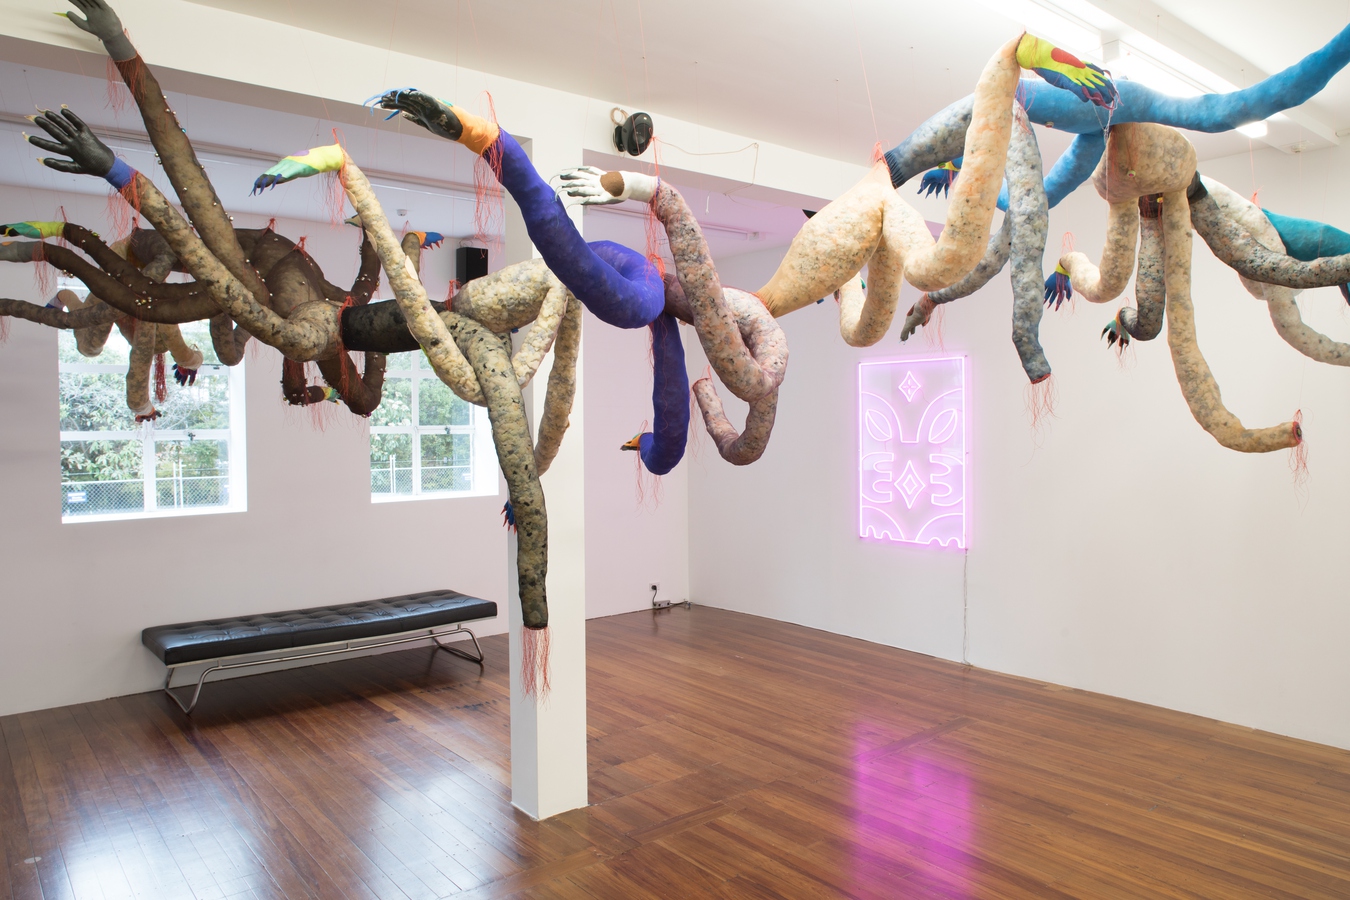 Image: Tyrone Te Waa, Fleapit (installation view), 2023. Stockings, work gloves, fabric, thread, bells, foam chips, wool. Photo by Janneth Gil.